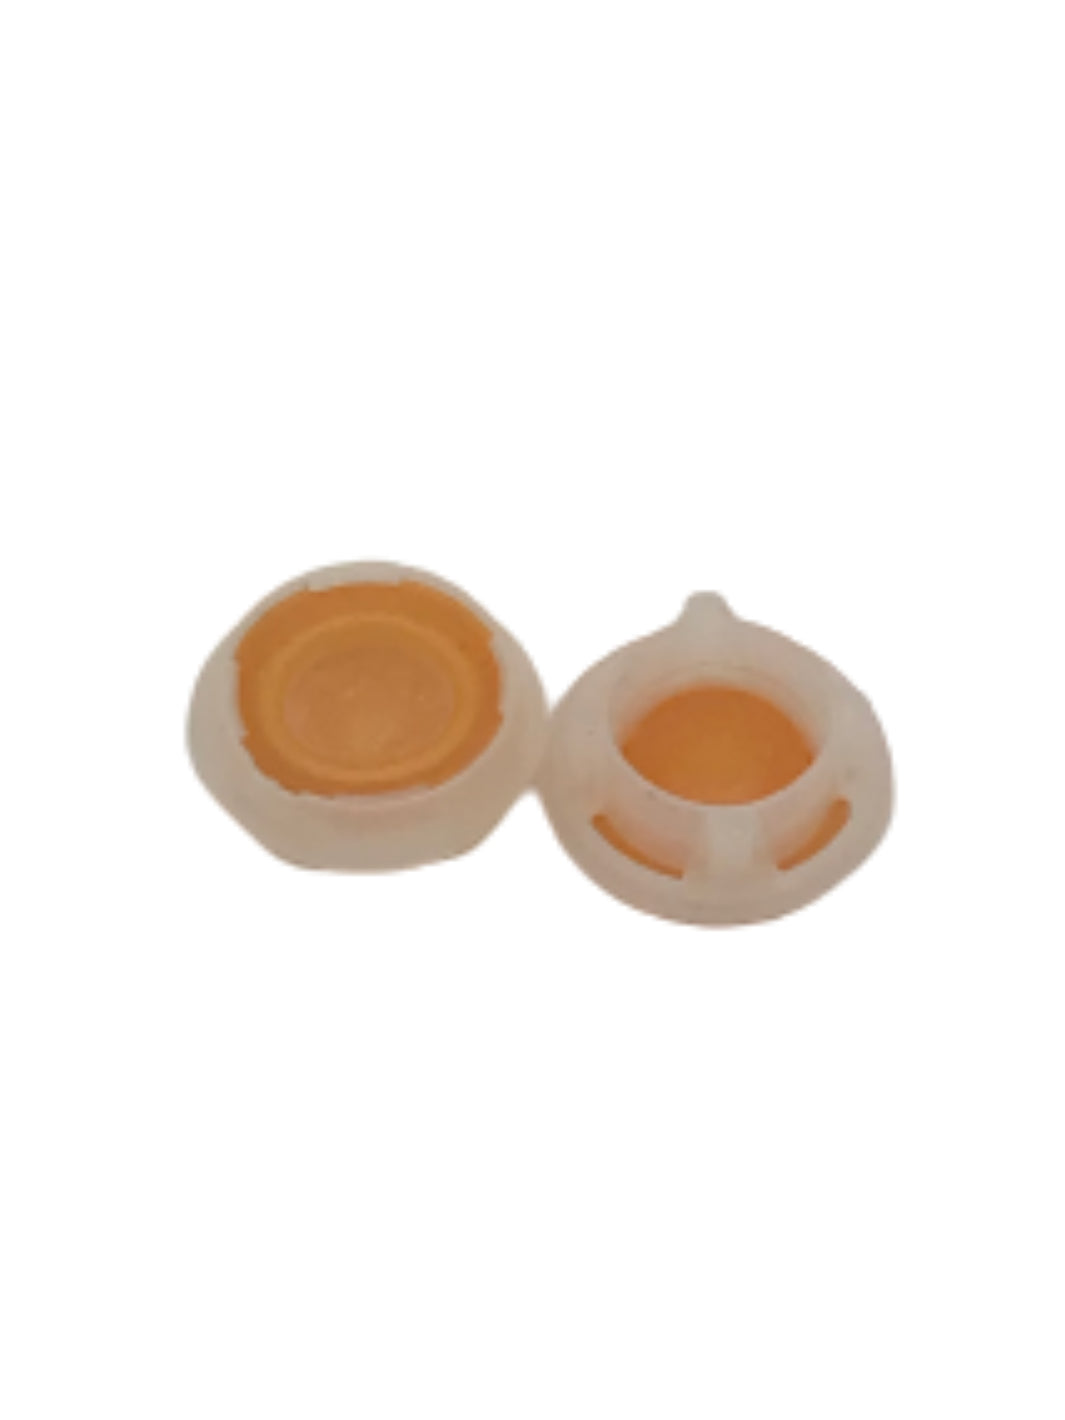 FELLOW Prismo Replacement Valves (2-Pack)